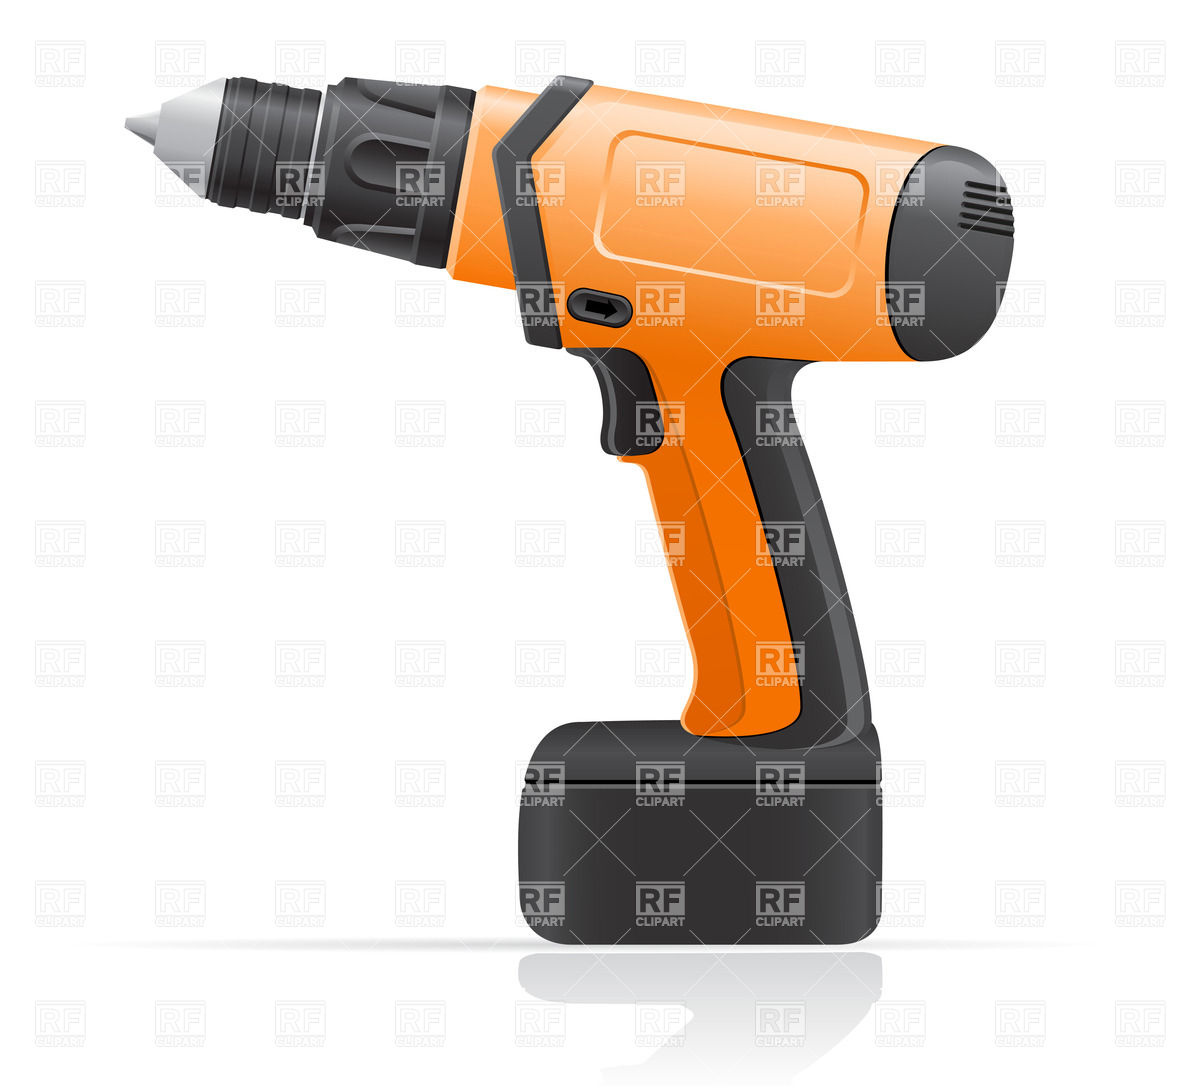 Hand Electric Tool   Screwdriver Download Royalty Free Vector Clipart